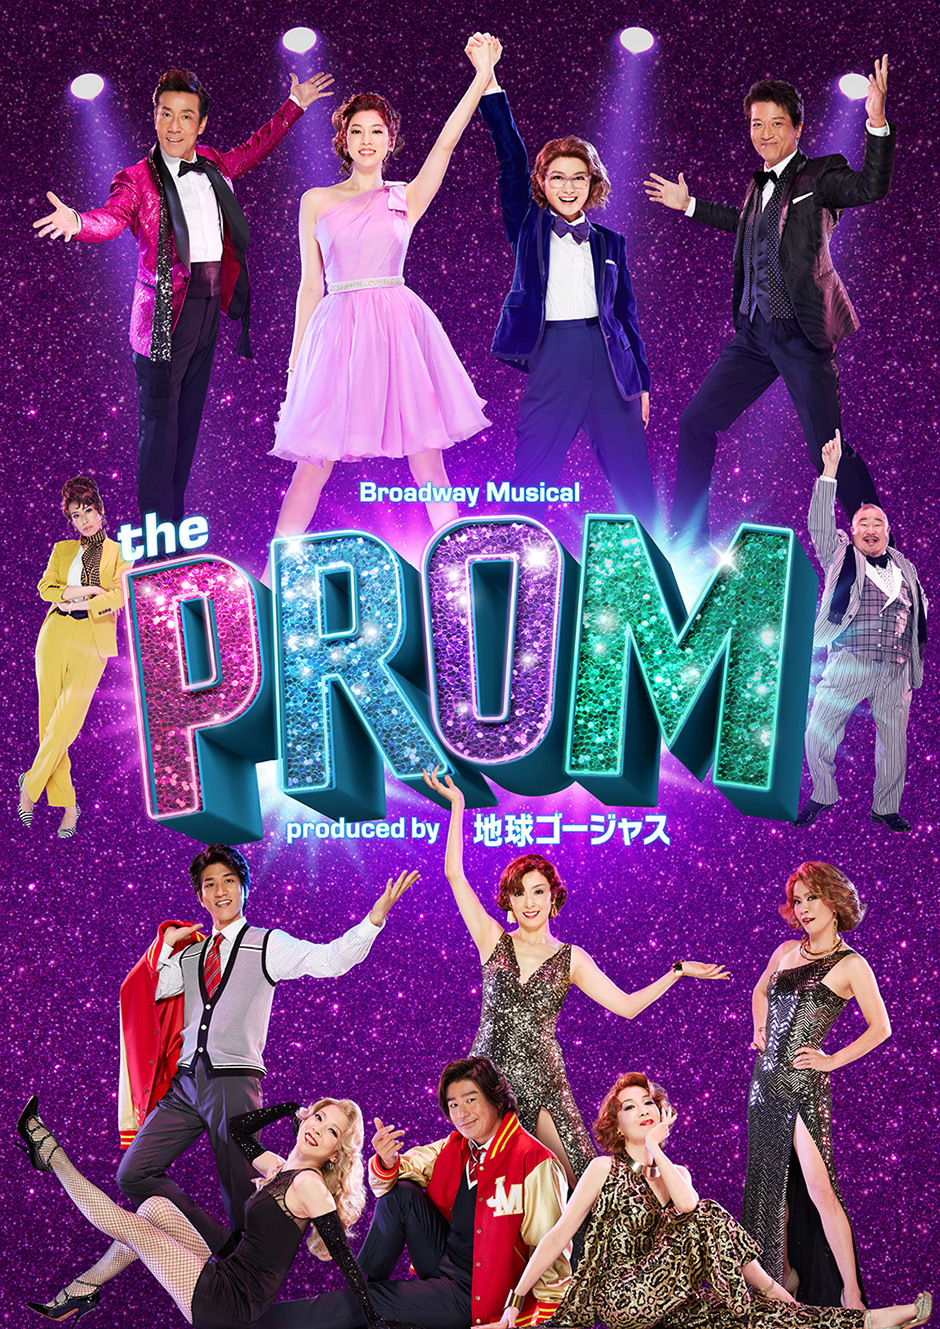 「Broadway Musical『The PROM』 Produced by 地球ゴージャス」